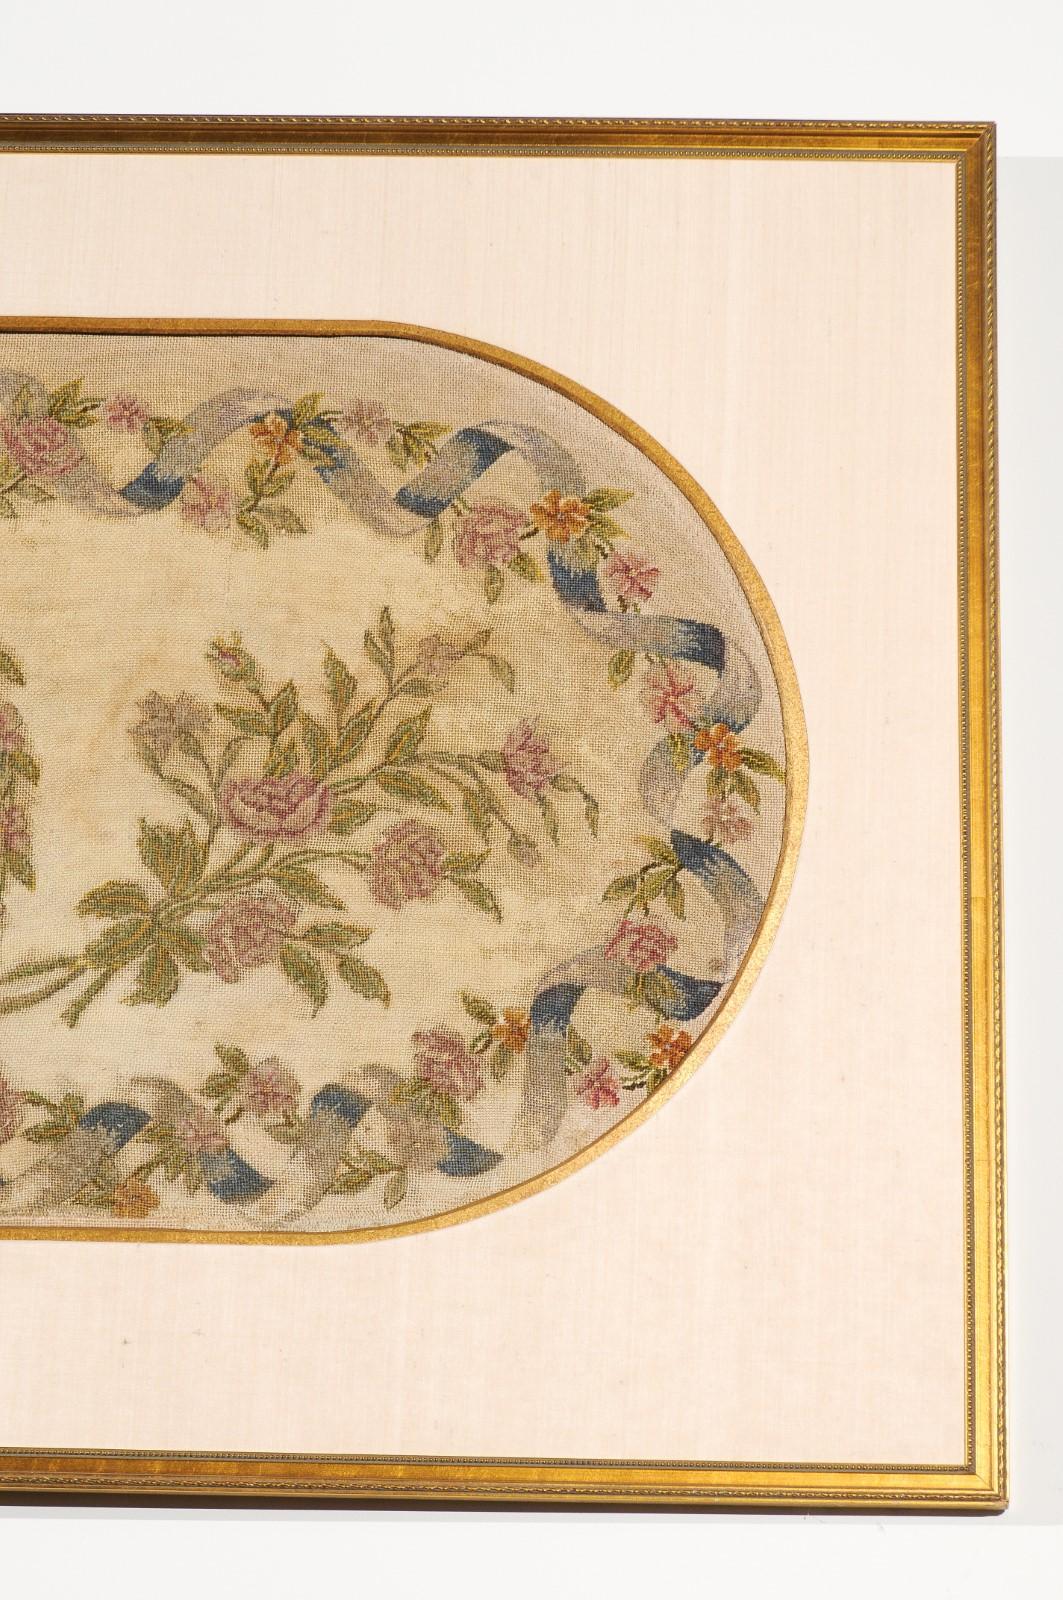 Giltwood French 19th Century Framed Needlepoint Tapestry with Ribbon and Floral Décor